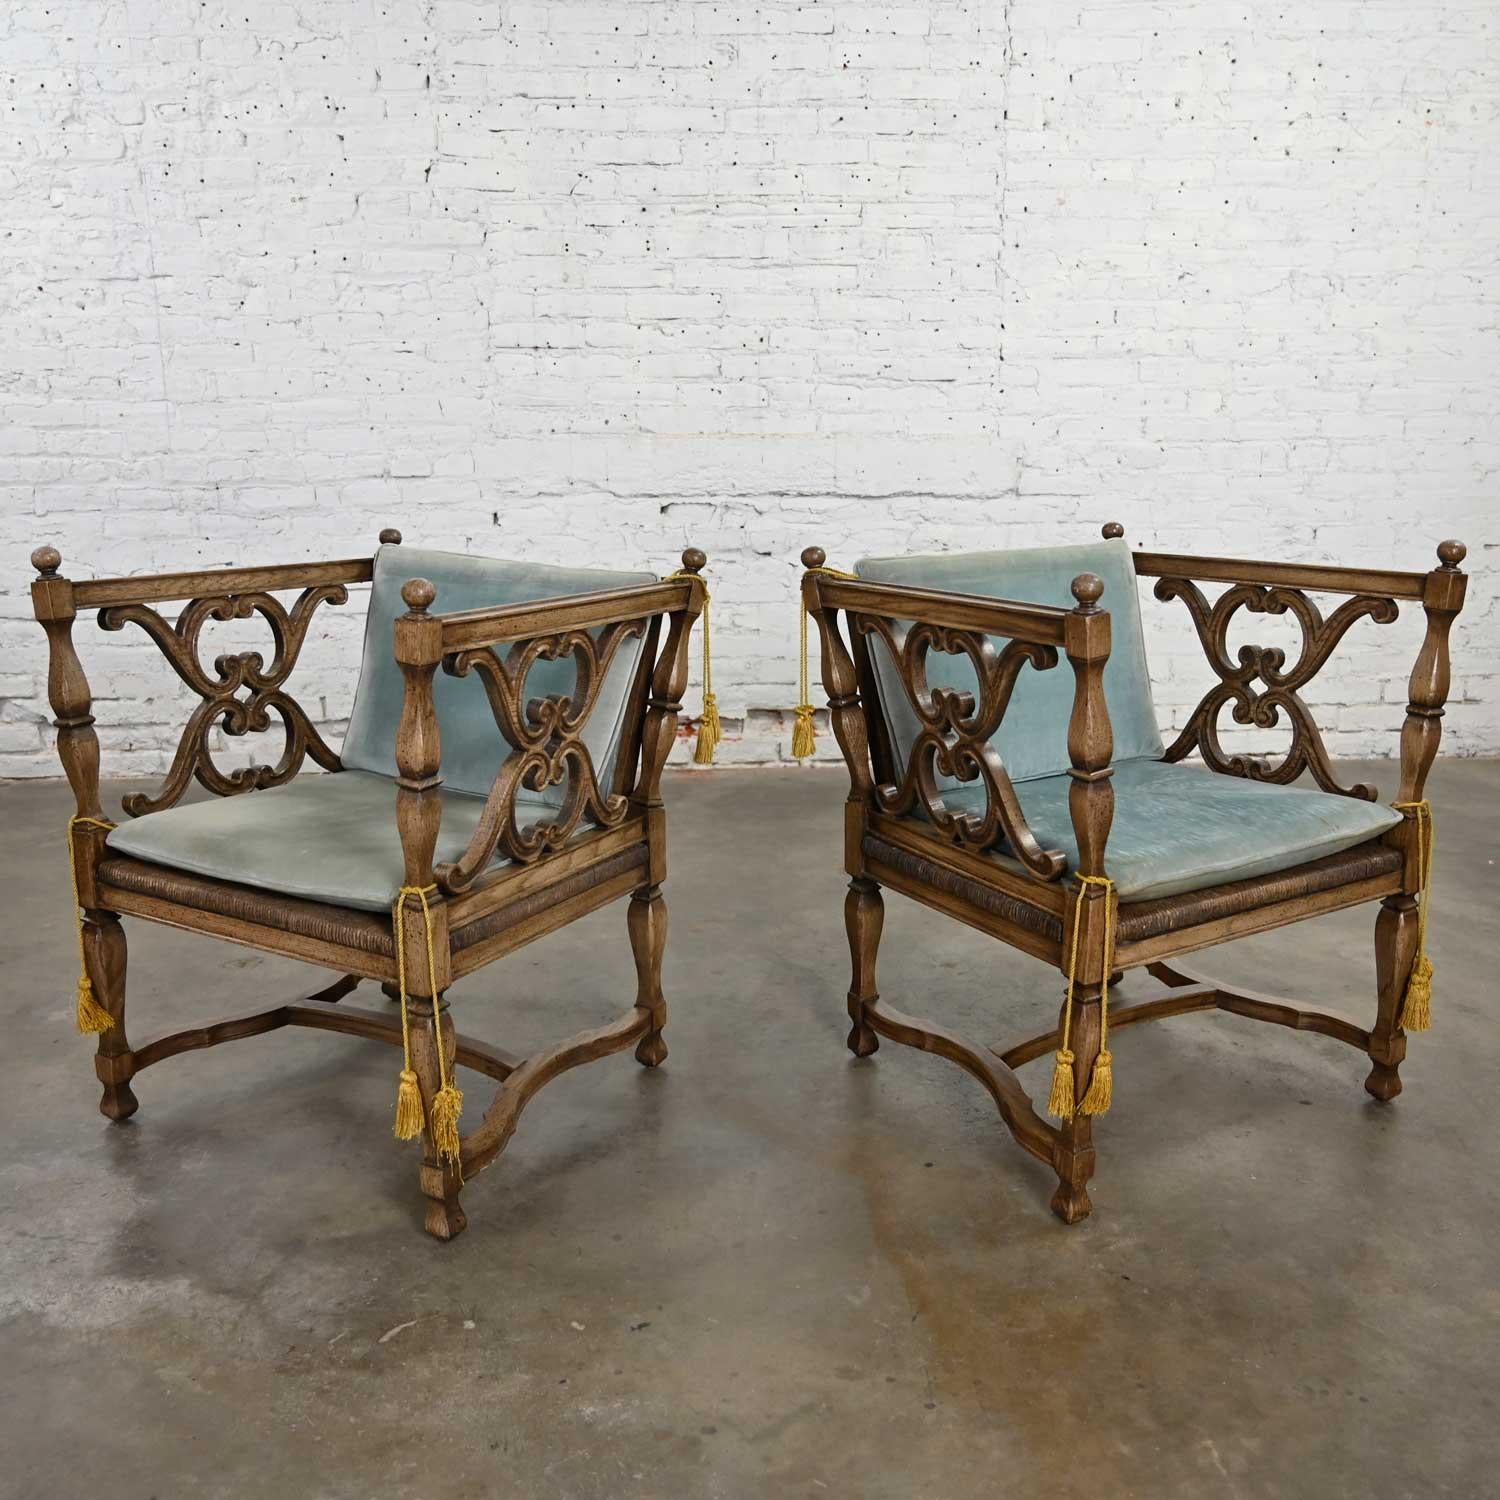 Awesome and unusual pair of Mediterranean or Spanish Revival style chairs with rush seats and loose ice blue velvet cushions attributed to American of Martinsville. Beautiful condition, keeping in mind that these are vintage and not new so will have